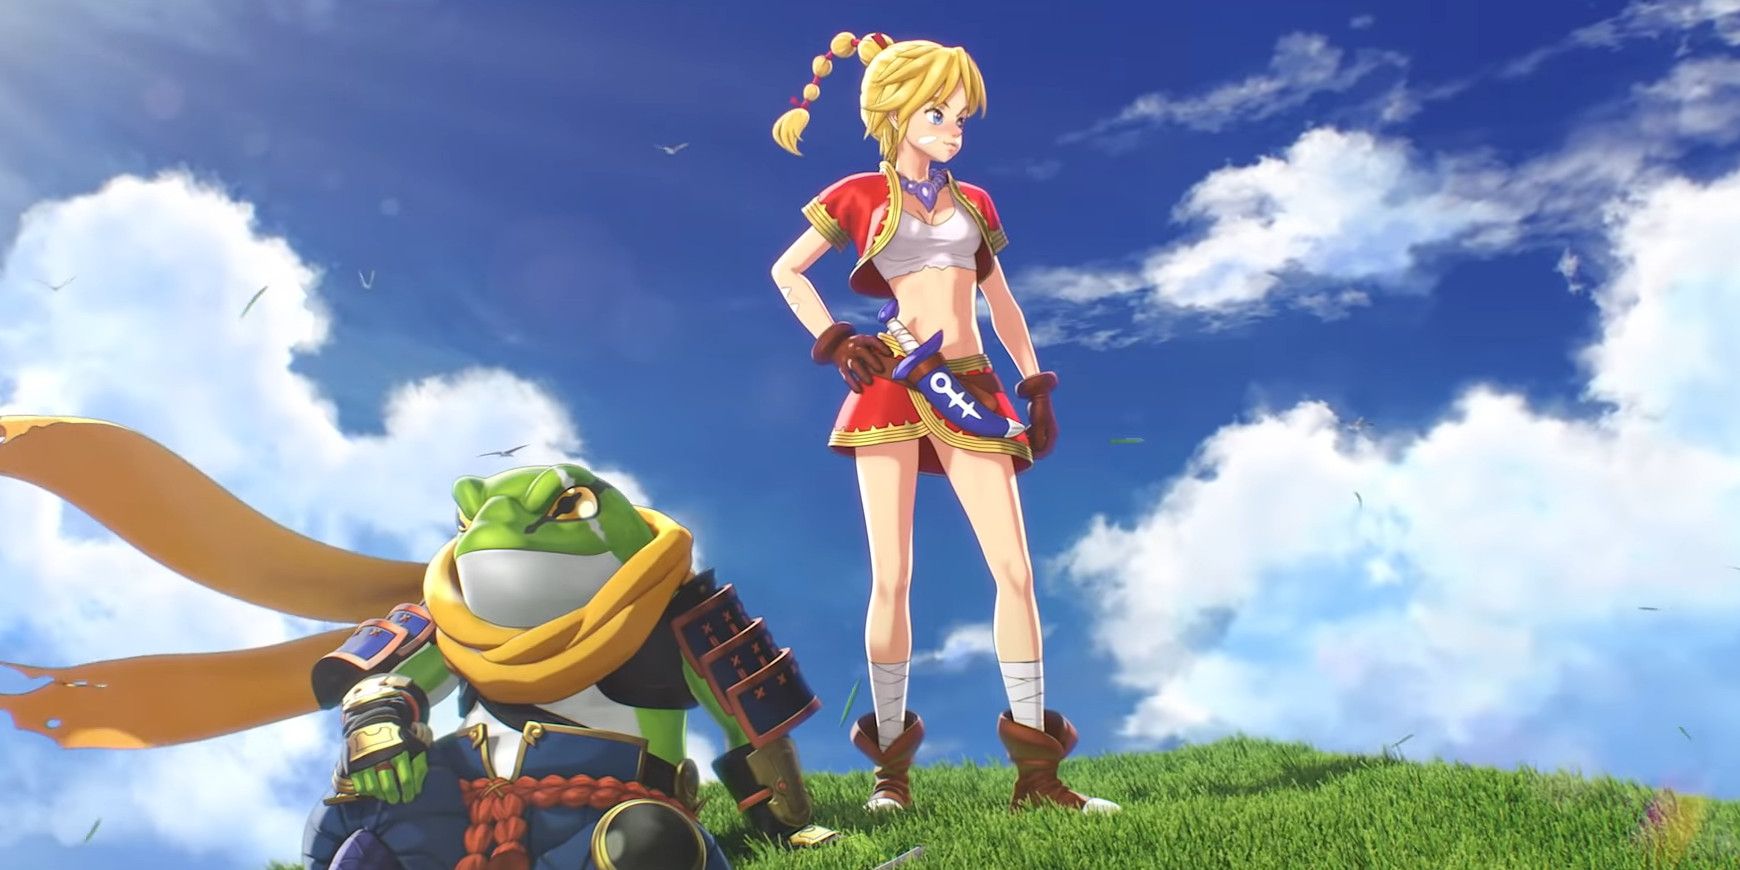 Chrono Cross Content Coming To Another Eden In Official Crossover